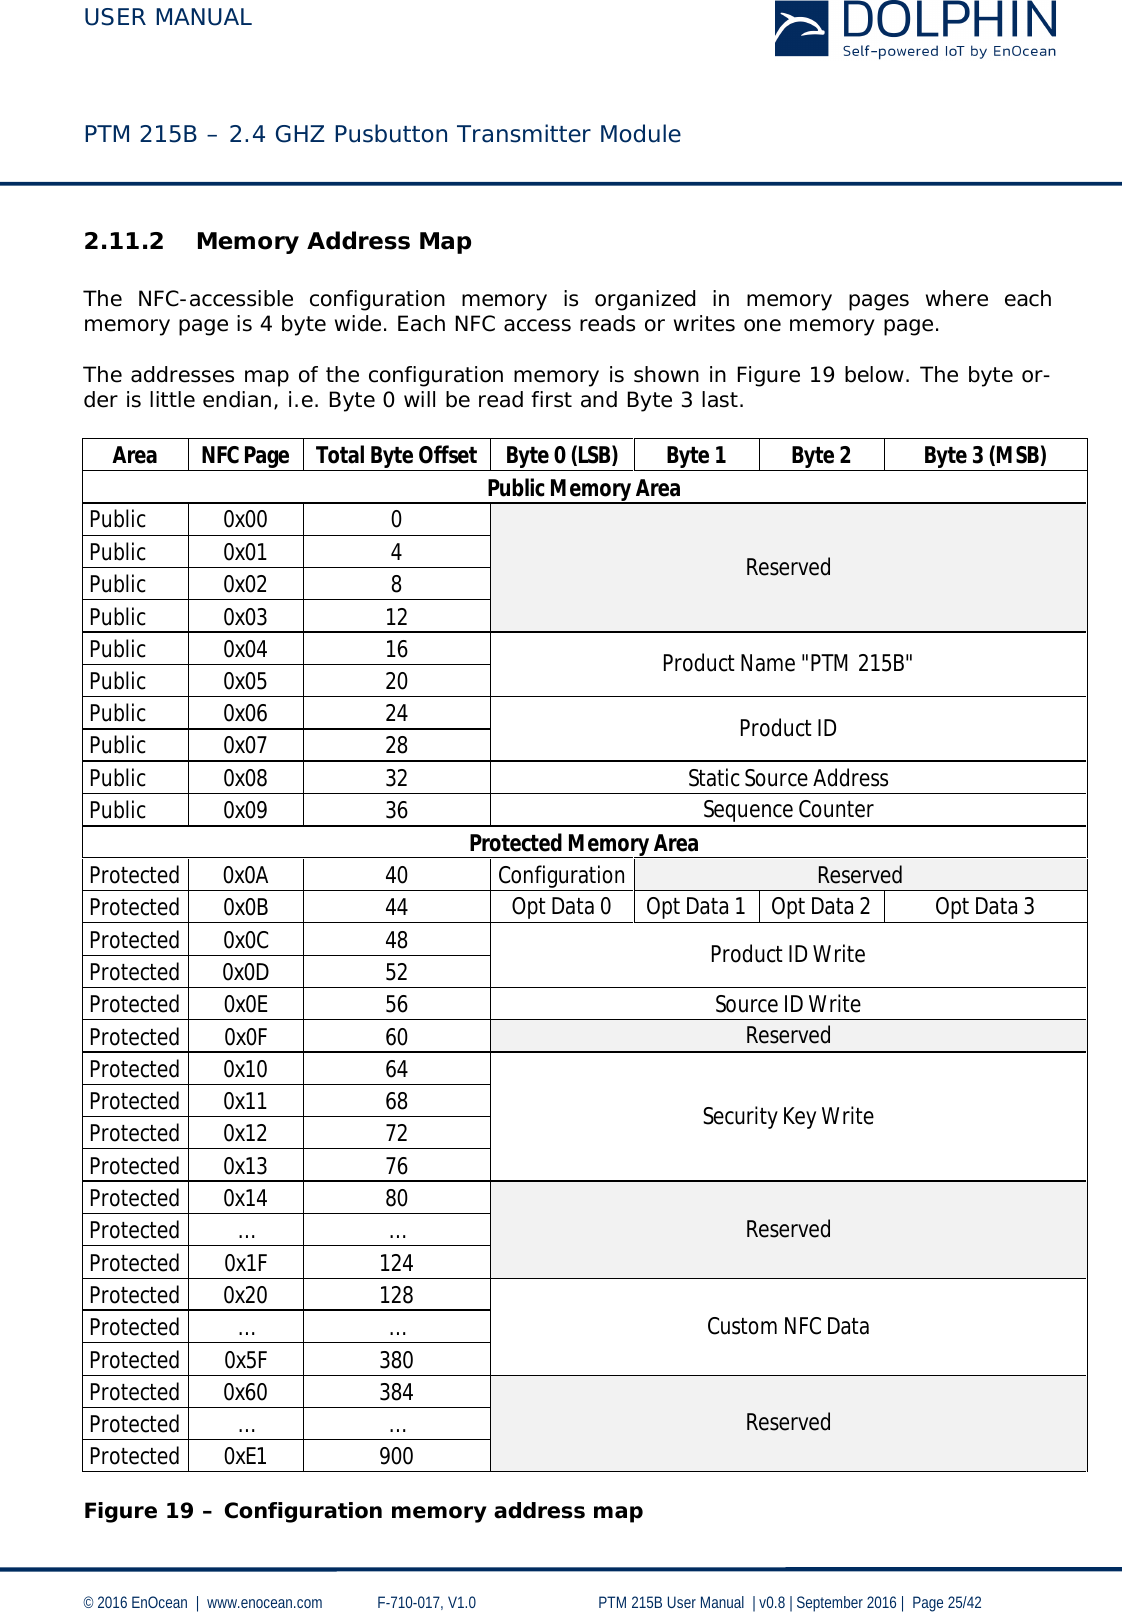  USER MANUAL    PTM 215B – 2.4 GHZ Pusbutton Transmitter Module  © 2016 EnOcean  |  www.enocean.com   F-710-017, V1.0        PTM 215B User Manual  | v0.8 | September 2016 |  Page 25/42  2.11.2 Memory Address Map  The NFC-accessible configuration memory is organized in memory pages where each memory page is 4 byte wide. Each NFC access reads or writes one memory page.  The addresses map of the configuration memory is shown in Figure 19 below. The byte or-der is little endian, i.e. Byte 0 will be read first and Byte 3 last.  Area NFC Page Total Byte Offset Byte 0 (LSB) Byte 1 Byte 2 Byte 3 (MSB) Public Memory Area Public 0x00 0 Reserved Public 0x01 4 Public 0x02 8 Public 0x03 12 Public 0x04 16 Product Name &quot;PTM 215B&quot; Public 0x05 20 Public 0x06 24 Product ID Public 0x07 28 Public 0x08 32 Static Source Address Public 0x09 36 Sequence Counter Protected Memory Area Protected 0x0A 40 Configuration Reserved Protected 0x0B 44 Opt Data 0 Opt Data 1 Opt Data 2 Opt Data 3 Protected 0x0C 48 Product ID Write Protected 0x0D 52 Protected 0x0E 56 Source ID Write Protected 0x0F 60 Reserved Protected 0x10 64 Security Key Write Protected 0x11 68 Protected 0x12 72 Protected 0x13 76 Protected 0x14 80 Reserved Protected … … Protected 0x1F 124 Protected 0x20 128 Custom NFC Data Protected … … Protected 0x5F 380 Protected 0x60 384 Reserved Protected … … Protected 0xE1 900  Figure 19 – Configuration memory address map 